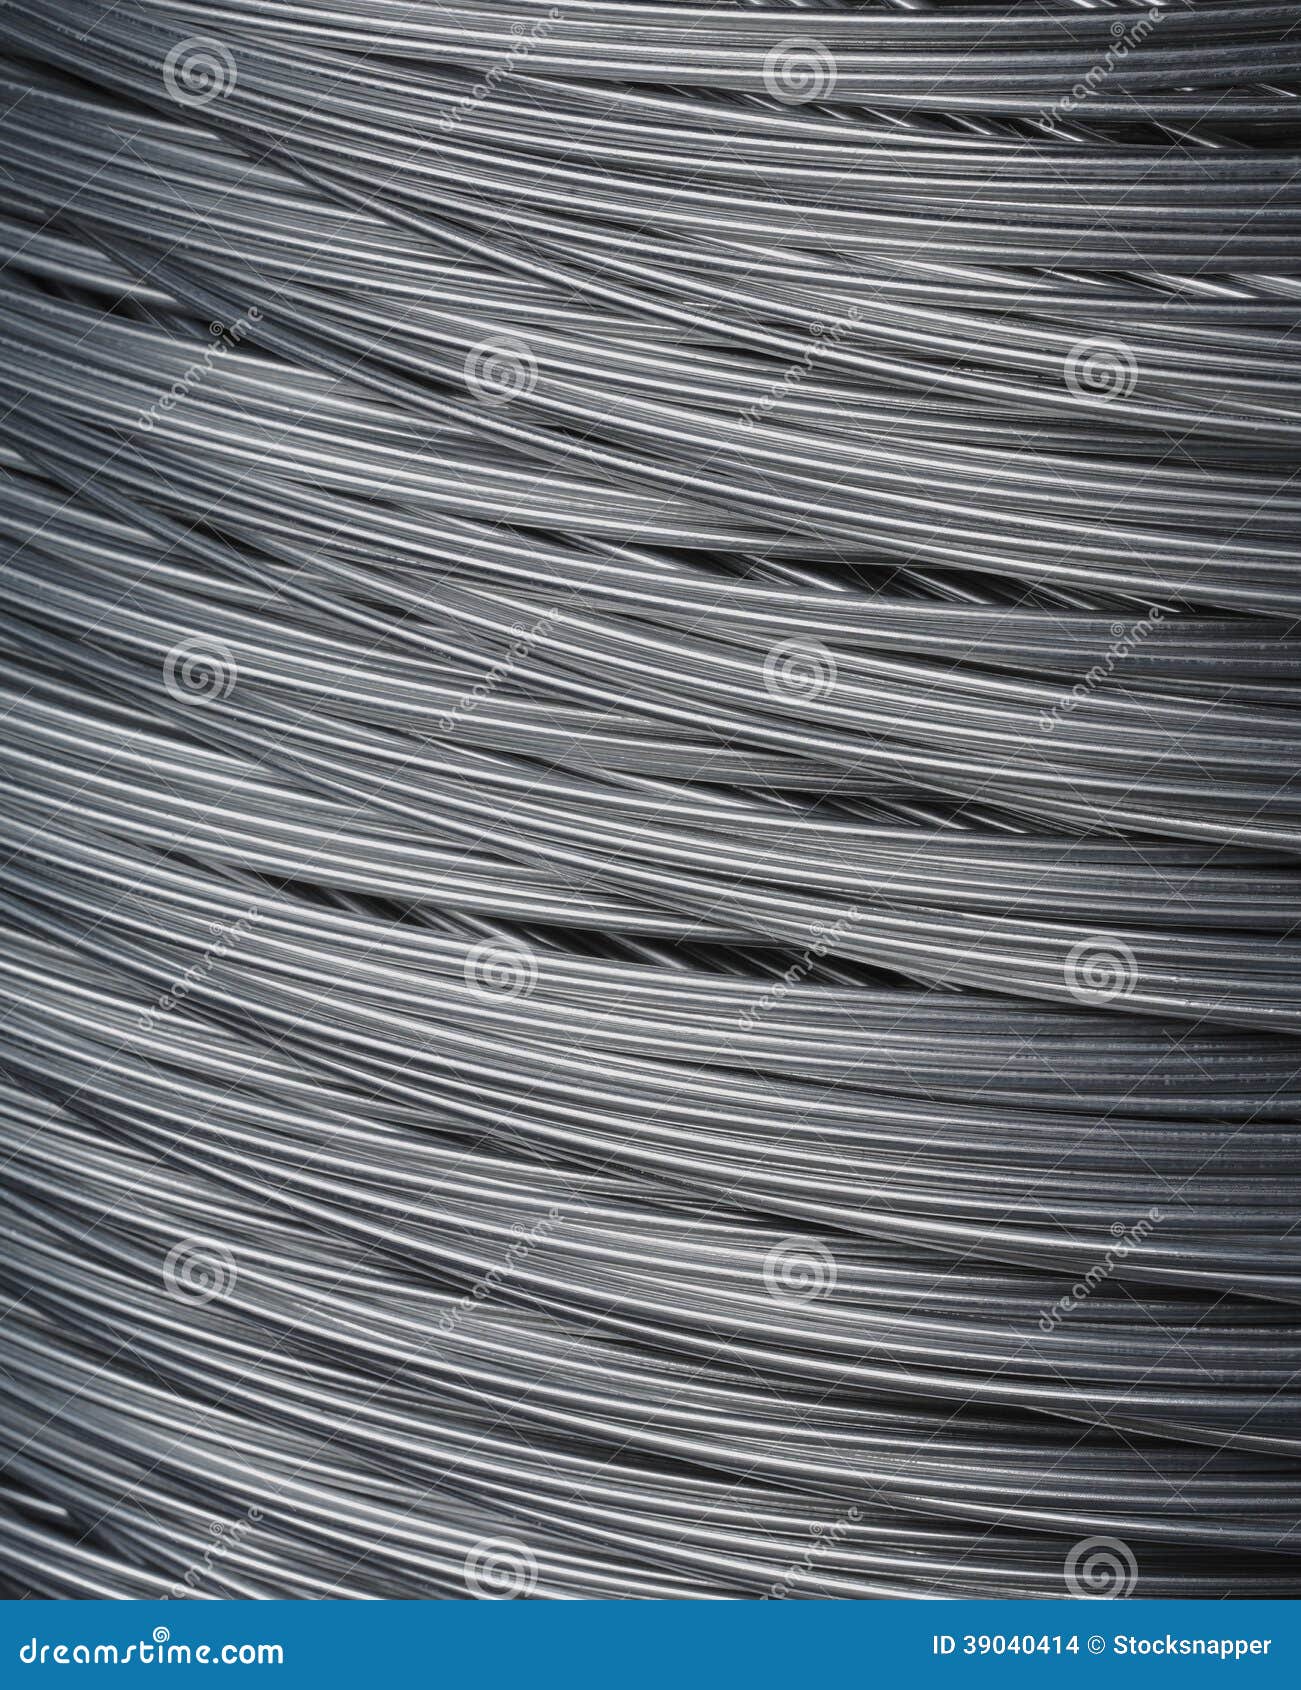 Steel Wire stock photo. Image of detail, metal, wire - 39040414